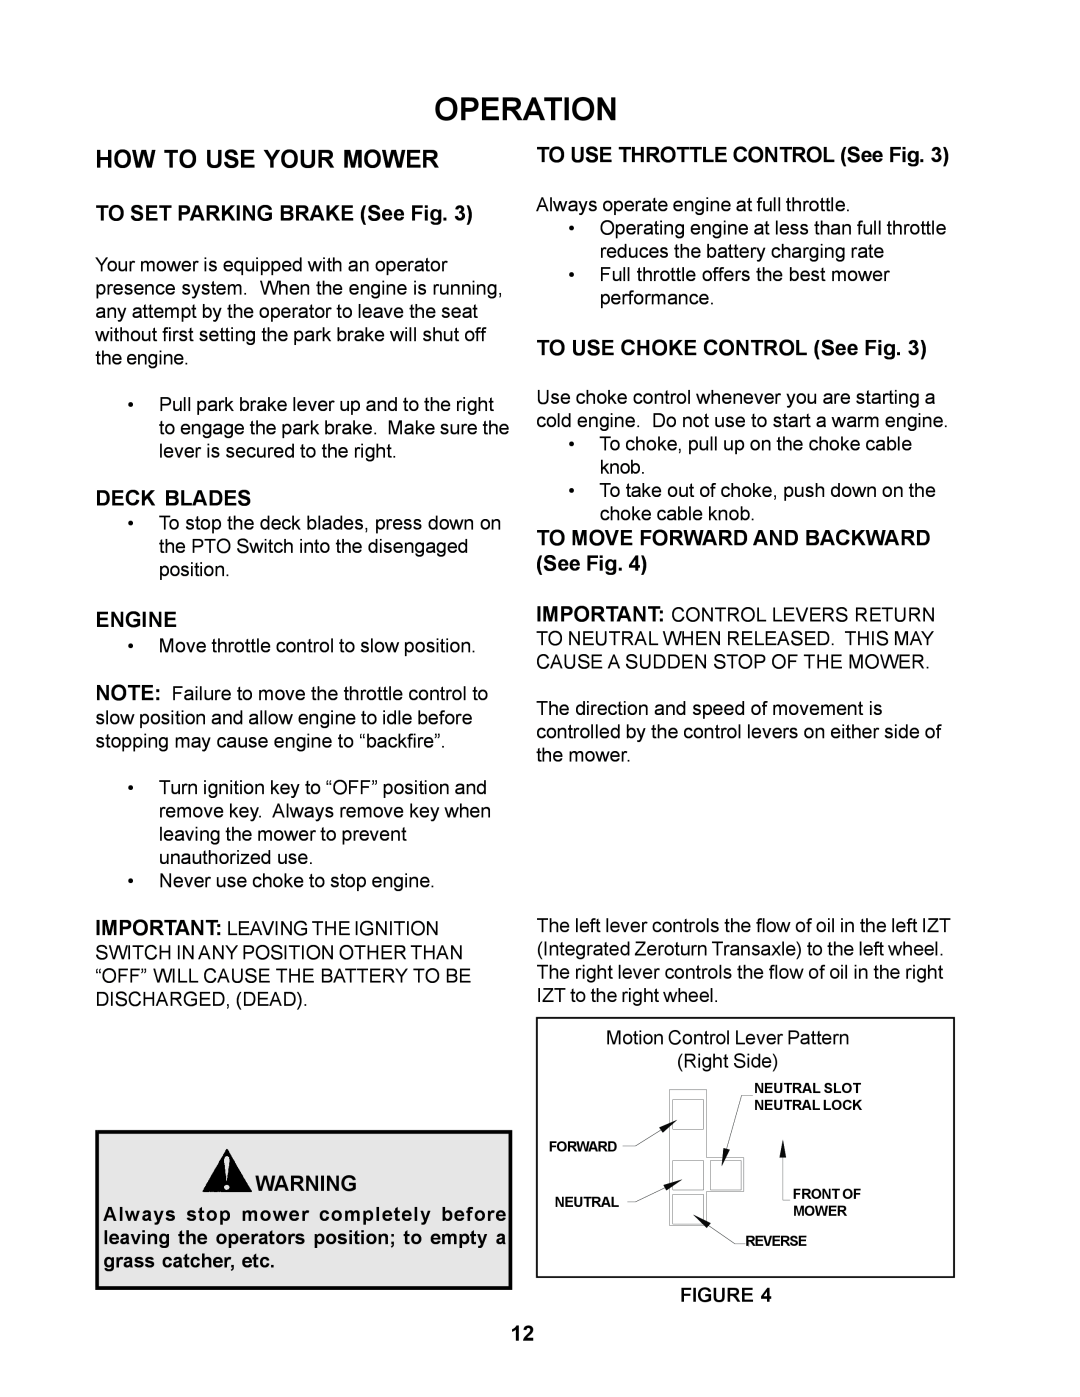 Yazoo/Kees ZCBI48180 manual How To Use Your Mower, TO SET PARKING BRAKE See Fig, Deck Blades, Engine, Operation 